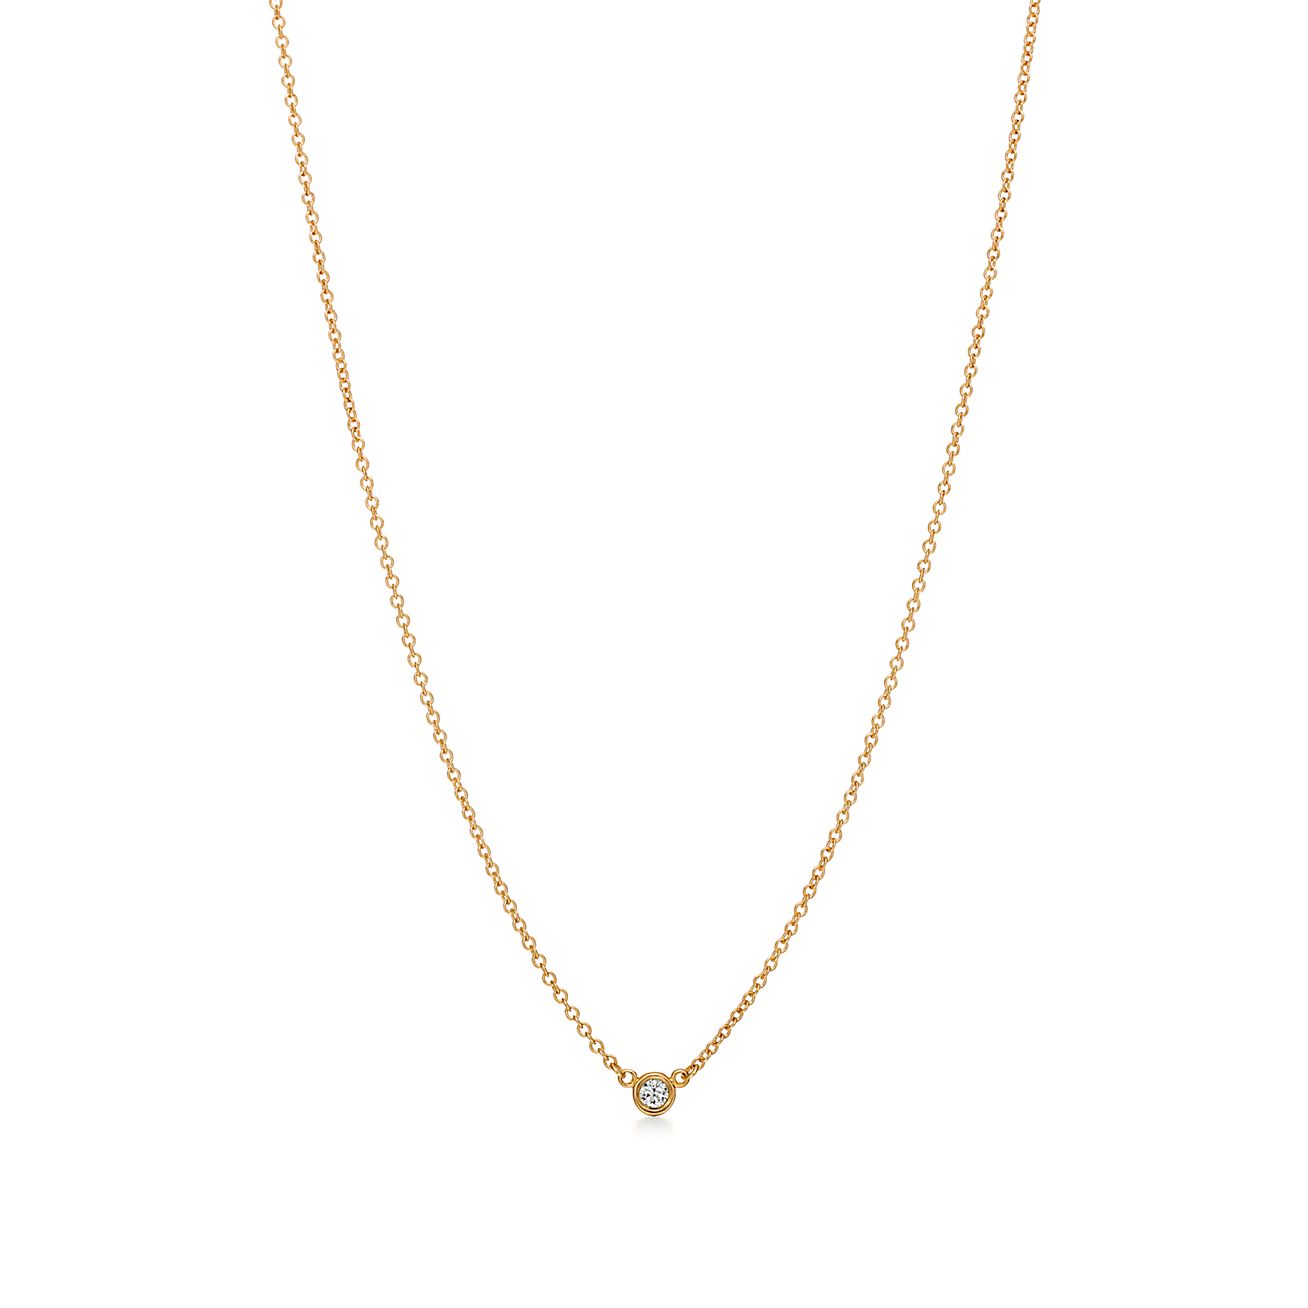 18kt yellow gold Prime diamond necklace